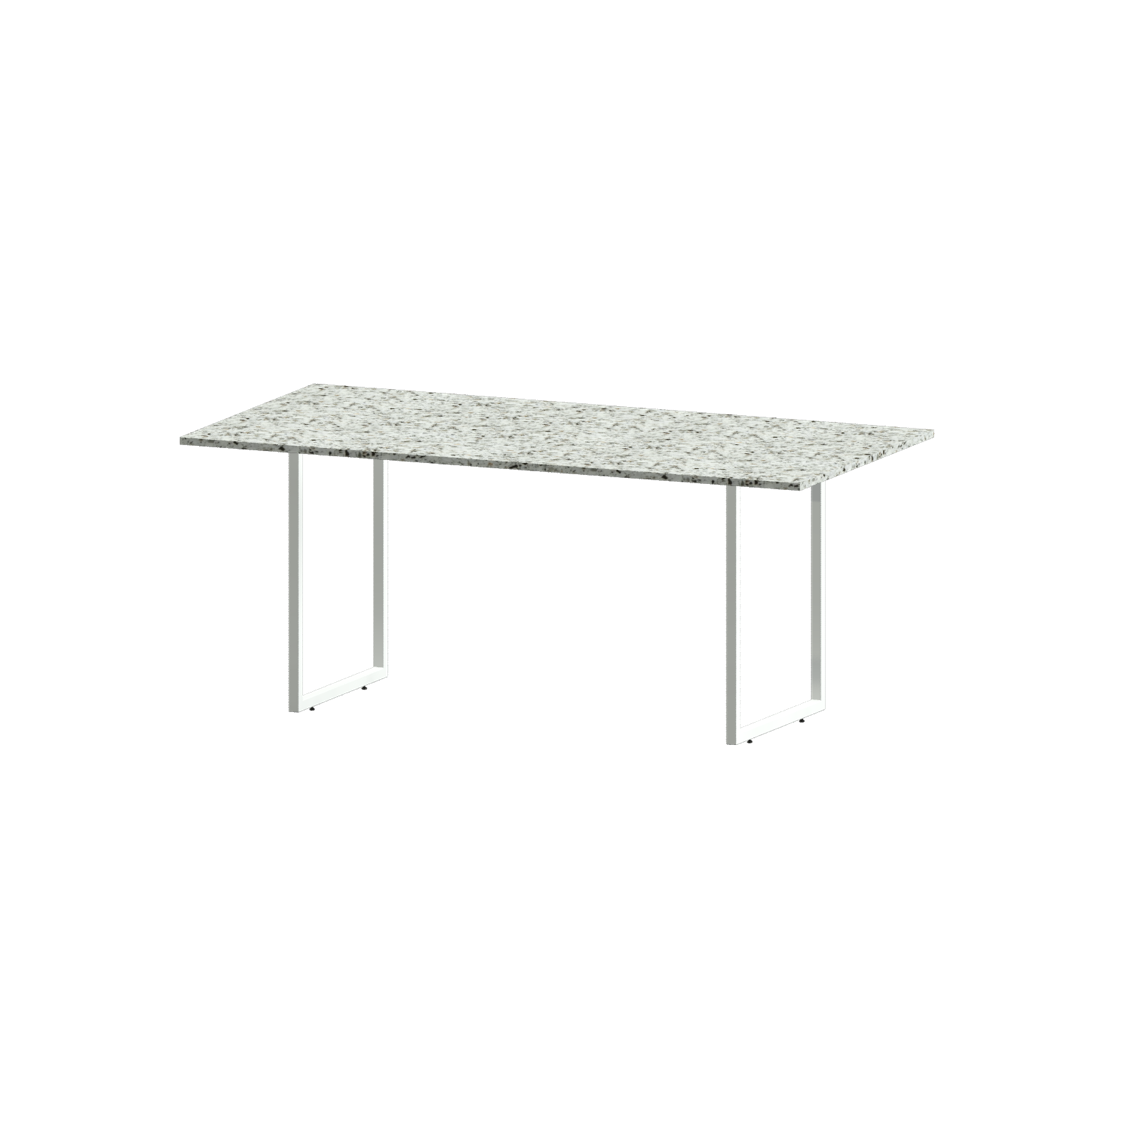 DINING TABLE, RECTANGLE, SMALL - Customer's Product with price 5500.00 ID bldYAO9oSIKmmsVUytw3D9W7